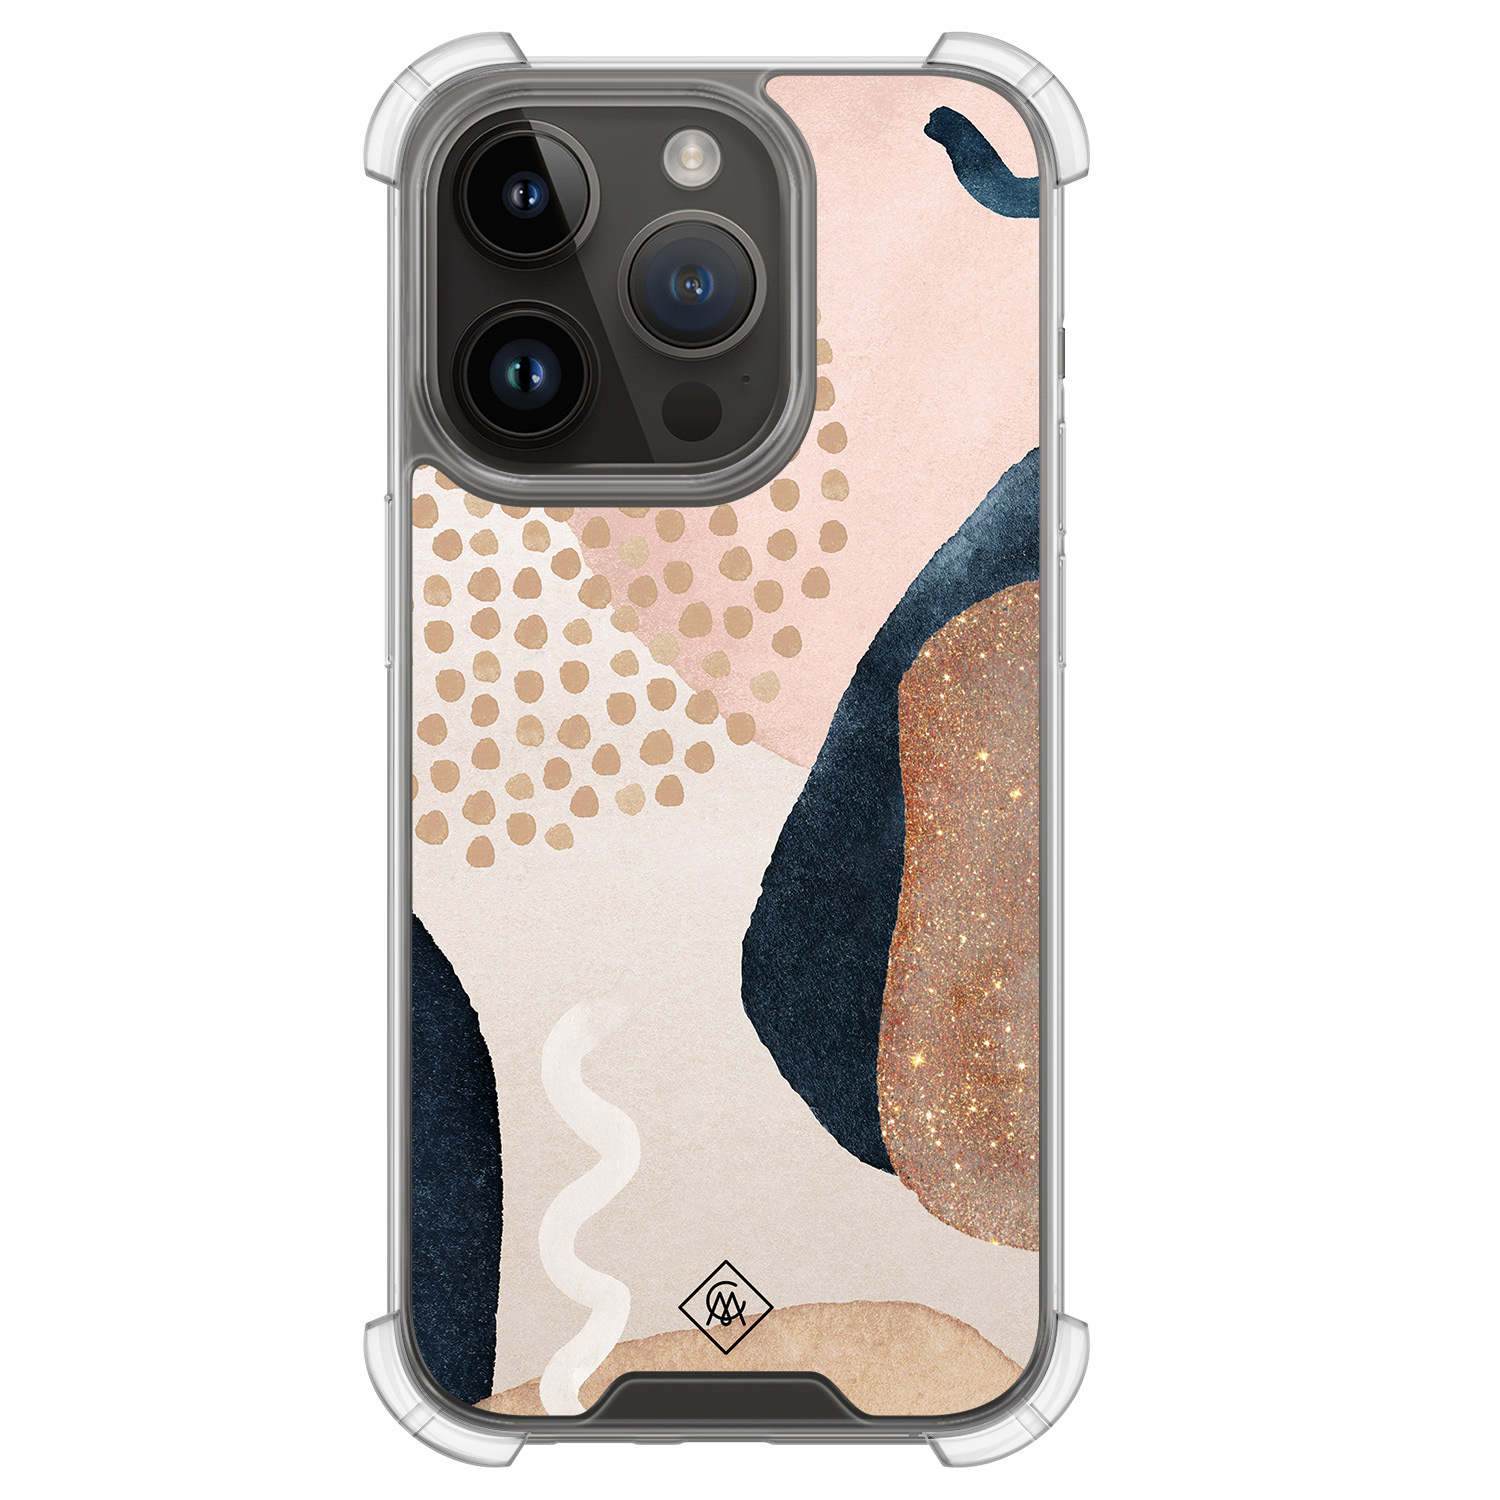 iPhone 13 Pro hoesje - Abstract dots - Casimoda® Shockproof case - Extra sterk - TPU/polycarbonaat - Bruin/beige, Transparant